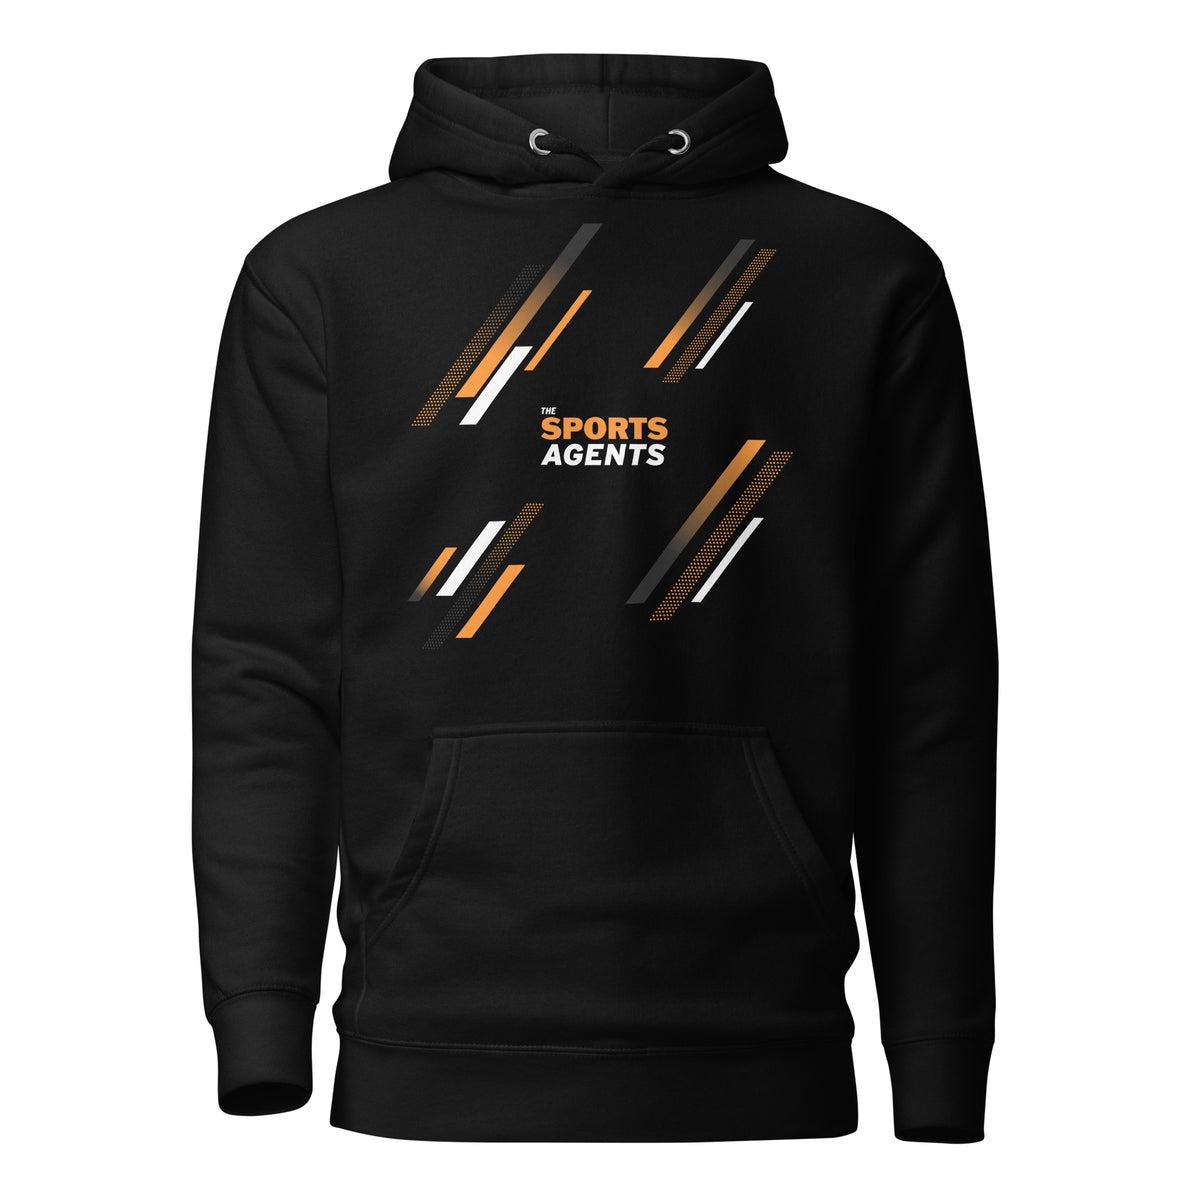 The Sports Agents Black Unisex Hoodie